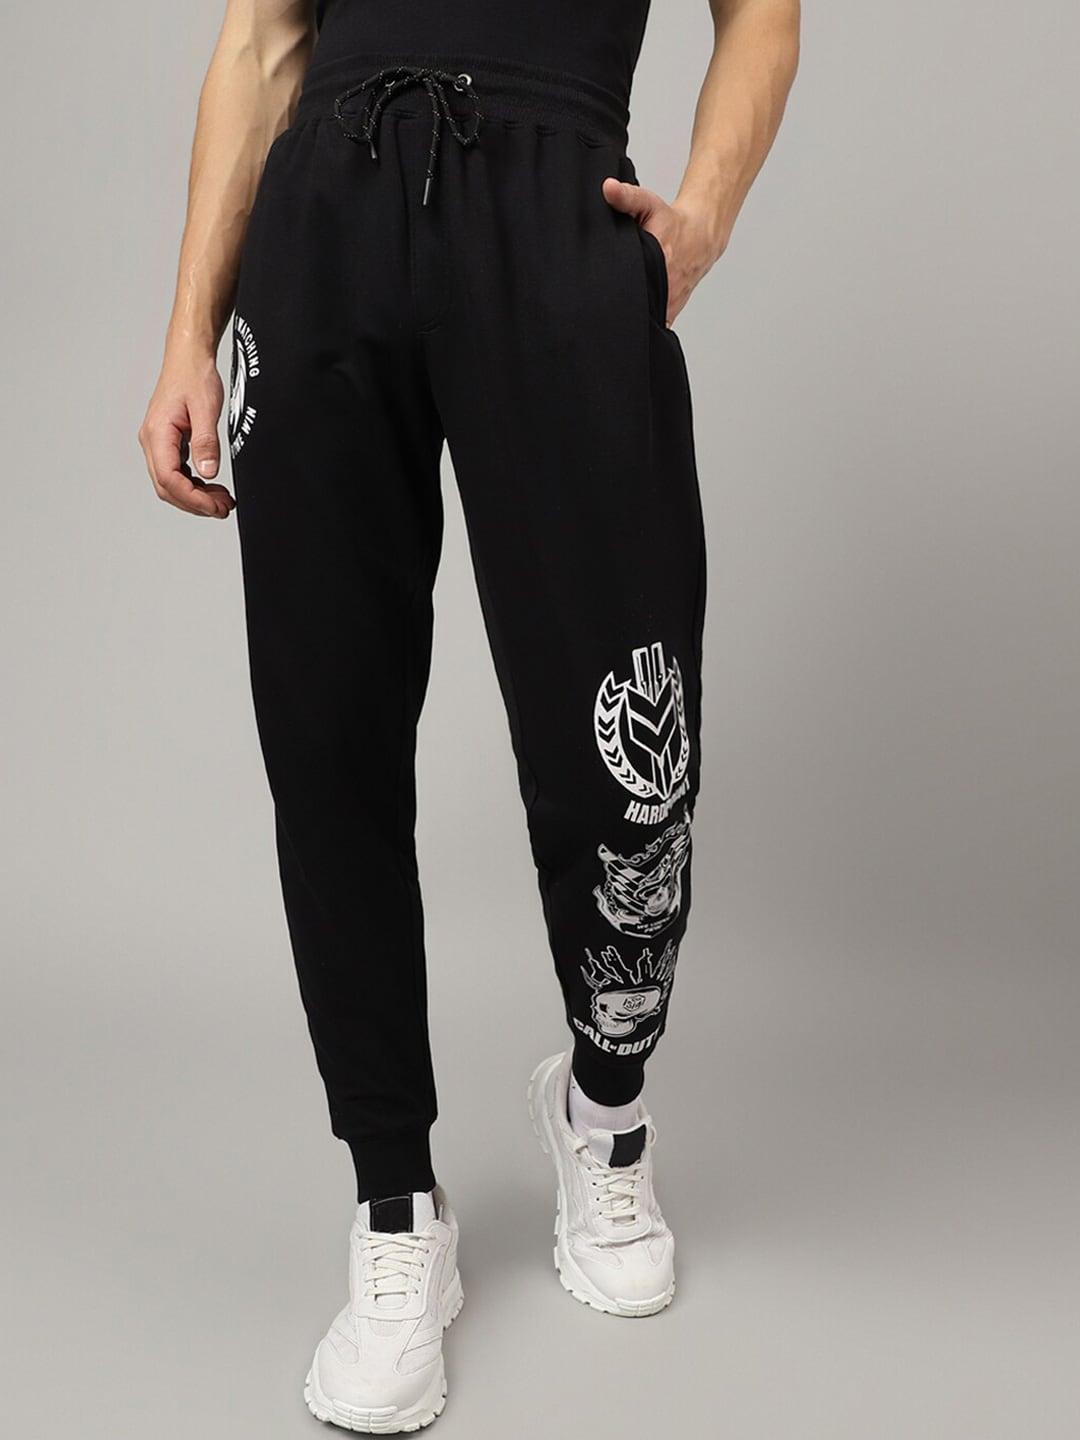 free-authority-call-of-duty-printed-mid-rise-cotton-jogger